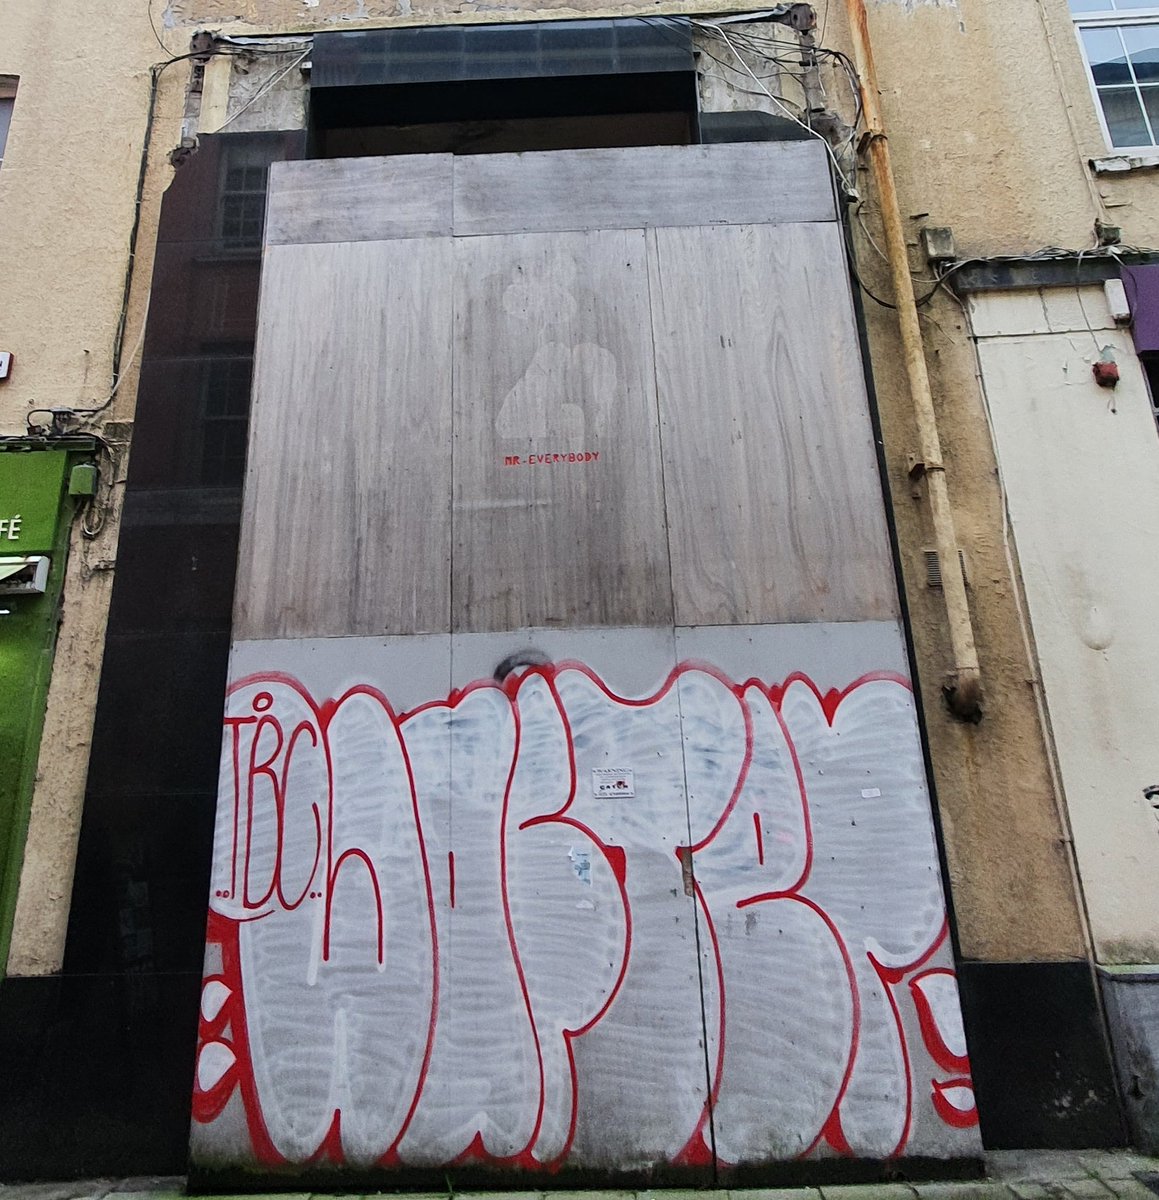 a long-term canvas, not what you might expect in a city centre streetproperty ownership & use/non-use is clearly a complex subject in Cork & across Ireland No.162  #regeneration  #respect  #economy  #heritage